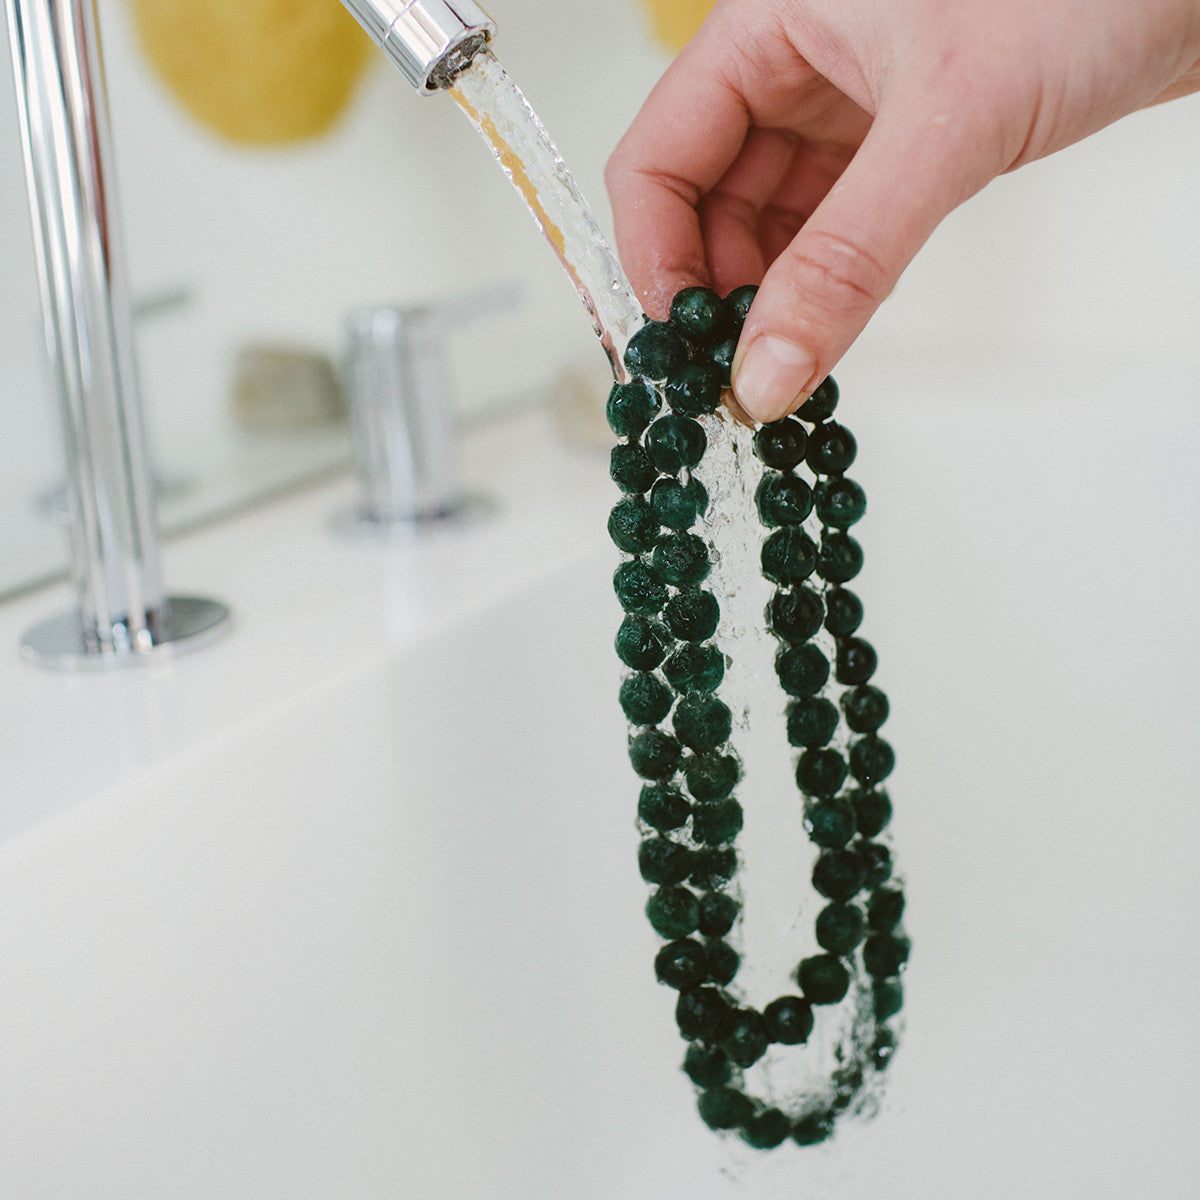 Crystal healing Dark Green Aventurine necklace known for strengthening and purifying organs is being cleansed with water